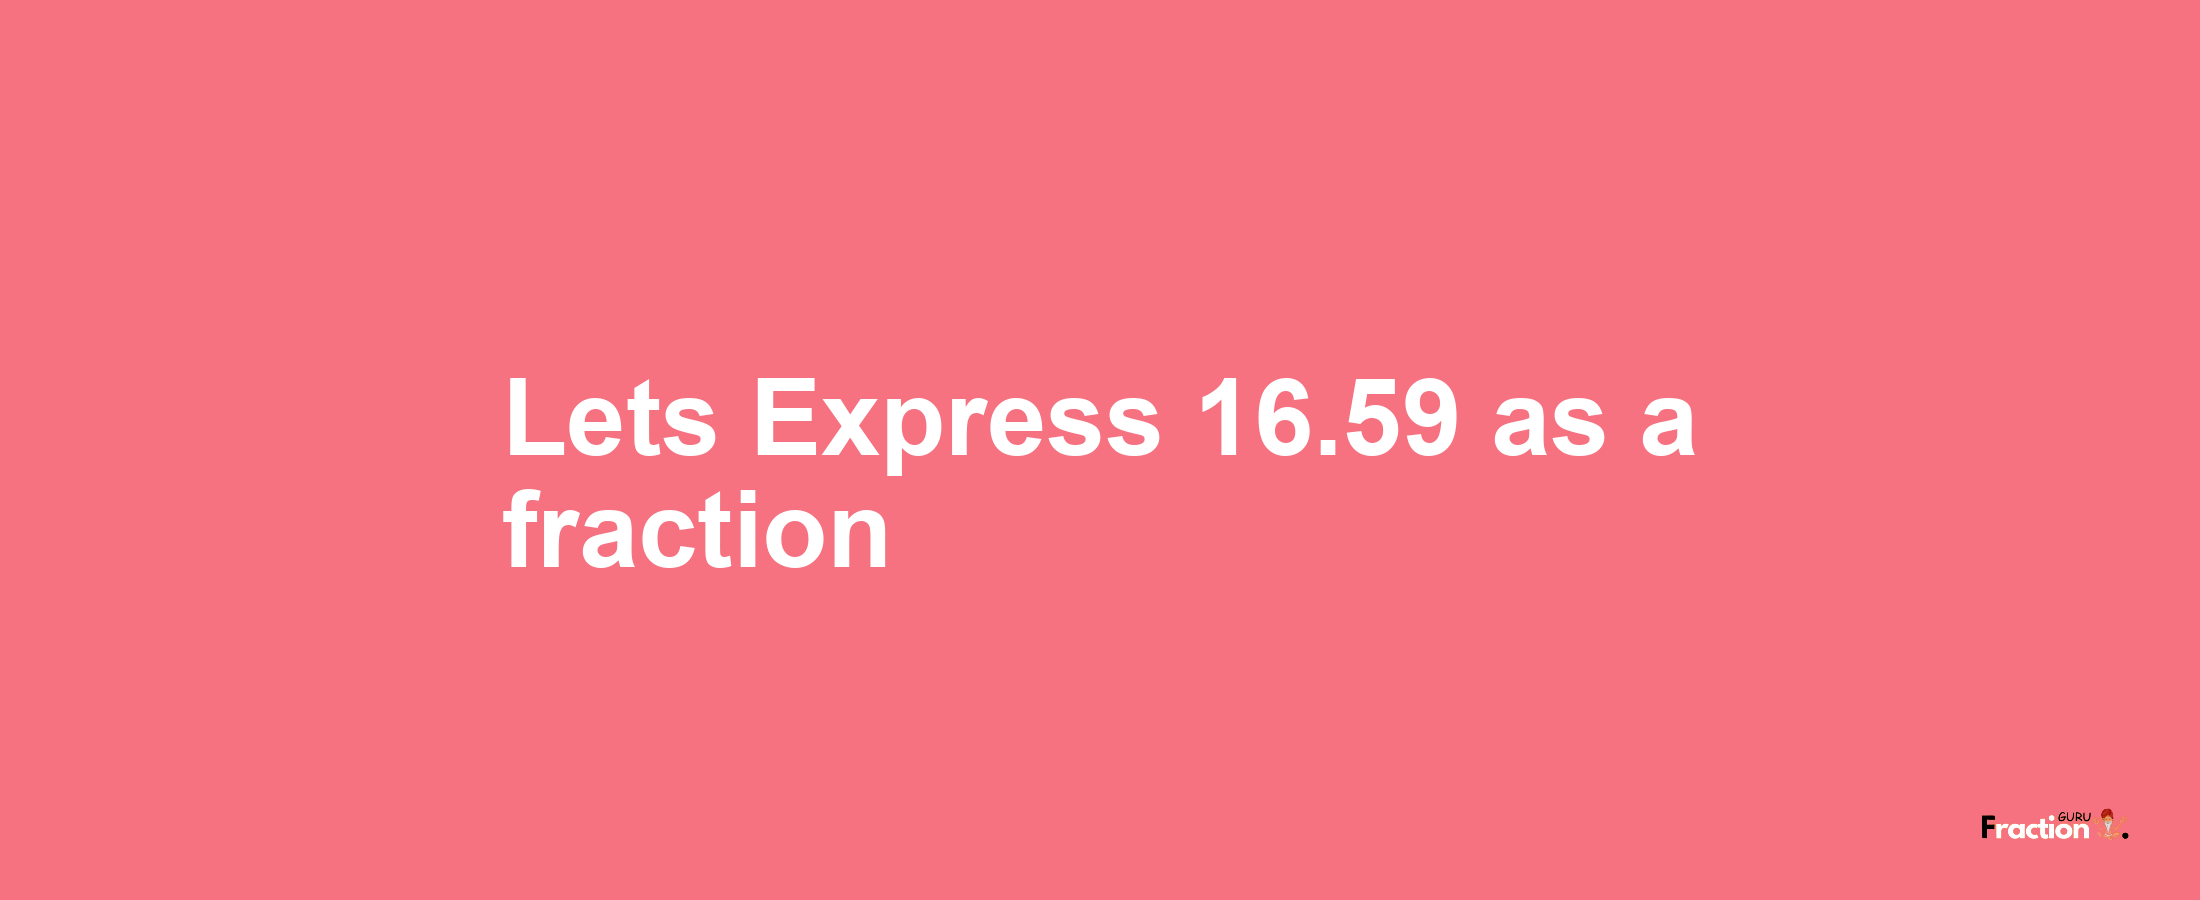 Lets Express 16.59 as afraction